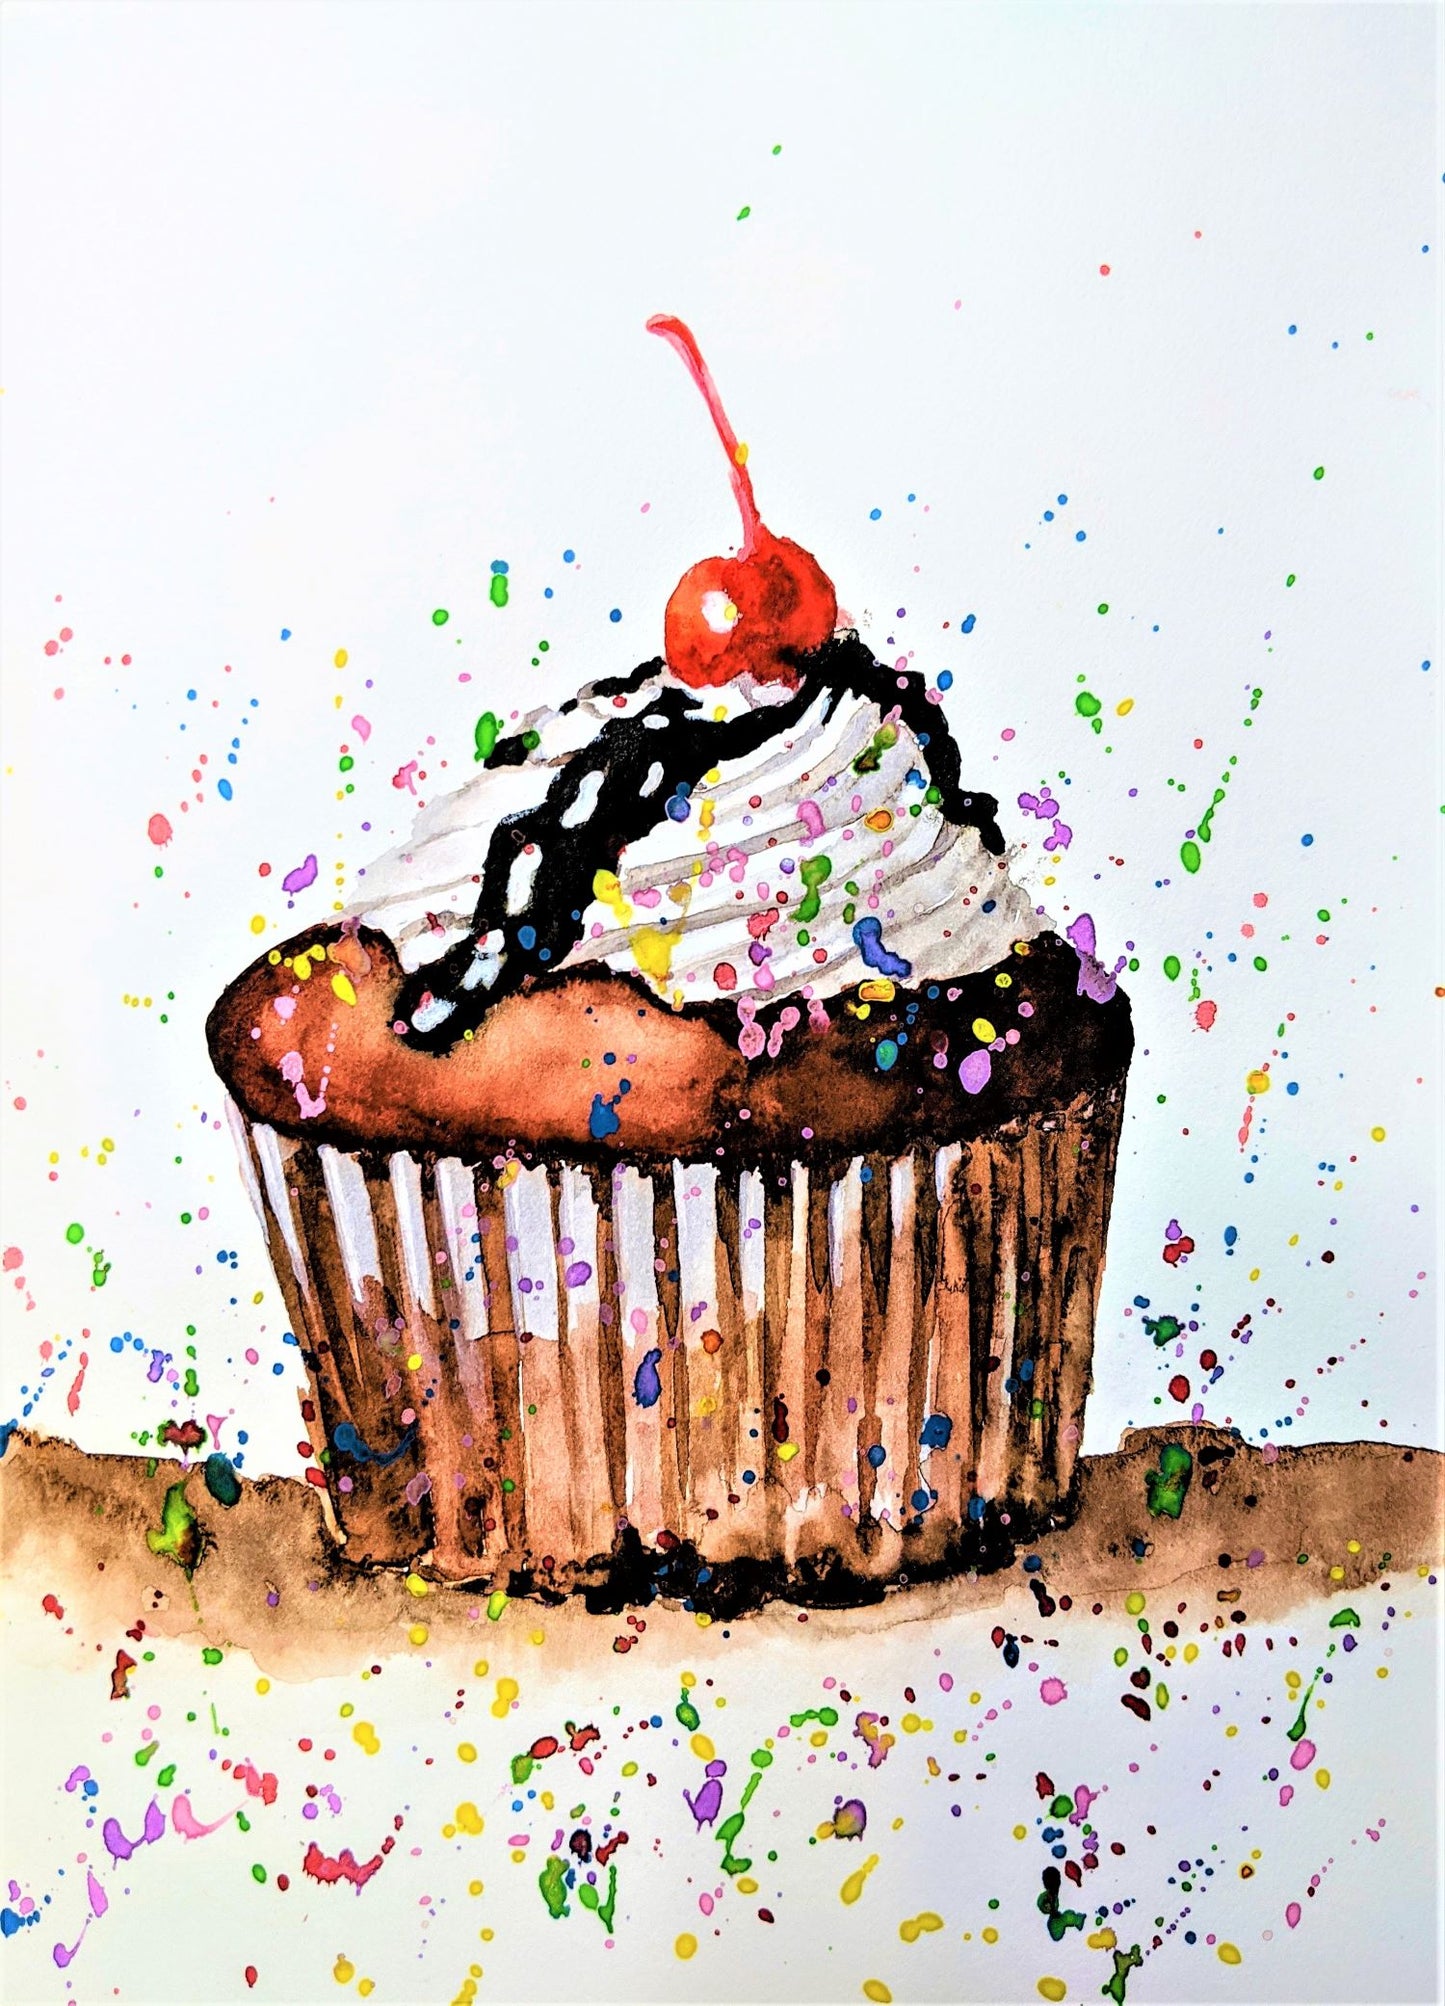 Cupcake with sprinkles watercolor painting